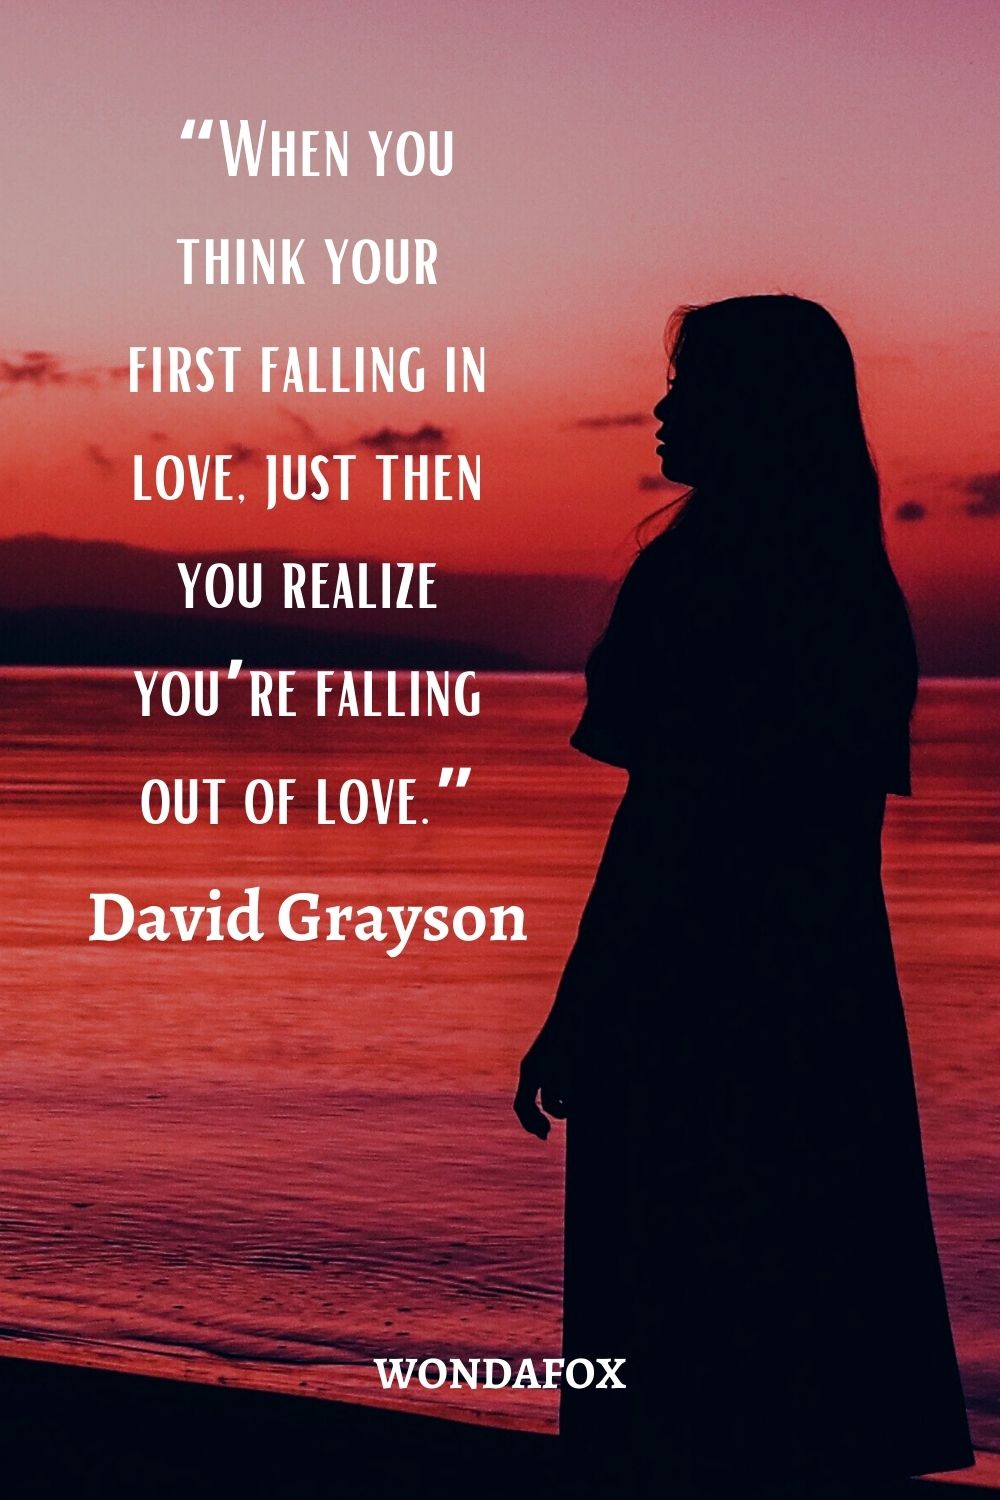 “When you think your first falling in love, just then you realize you’re falling out of love.”
David Grayson
